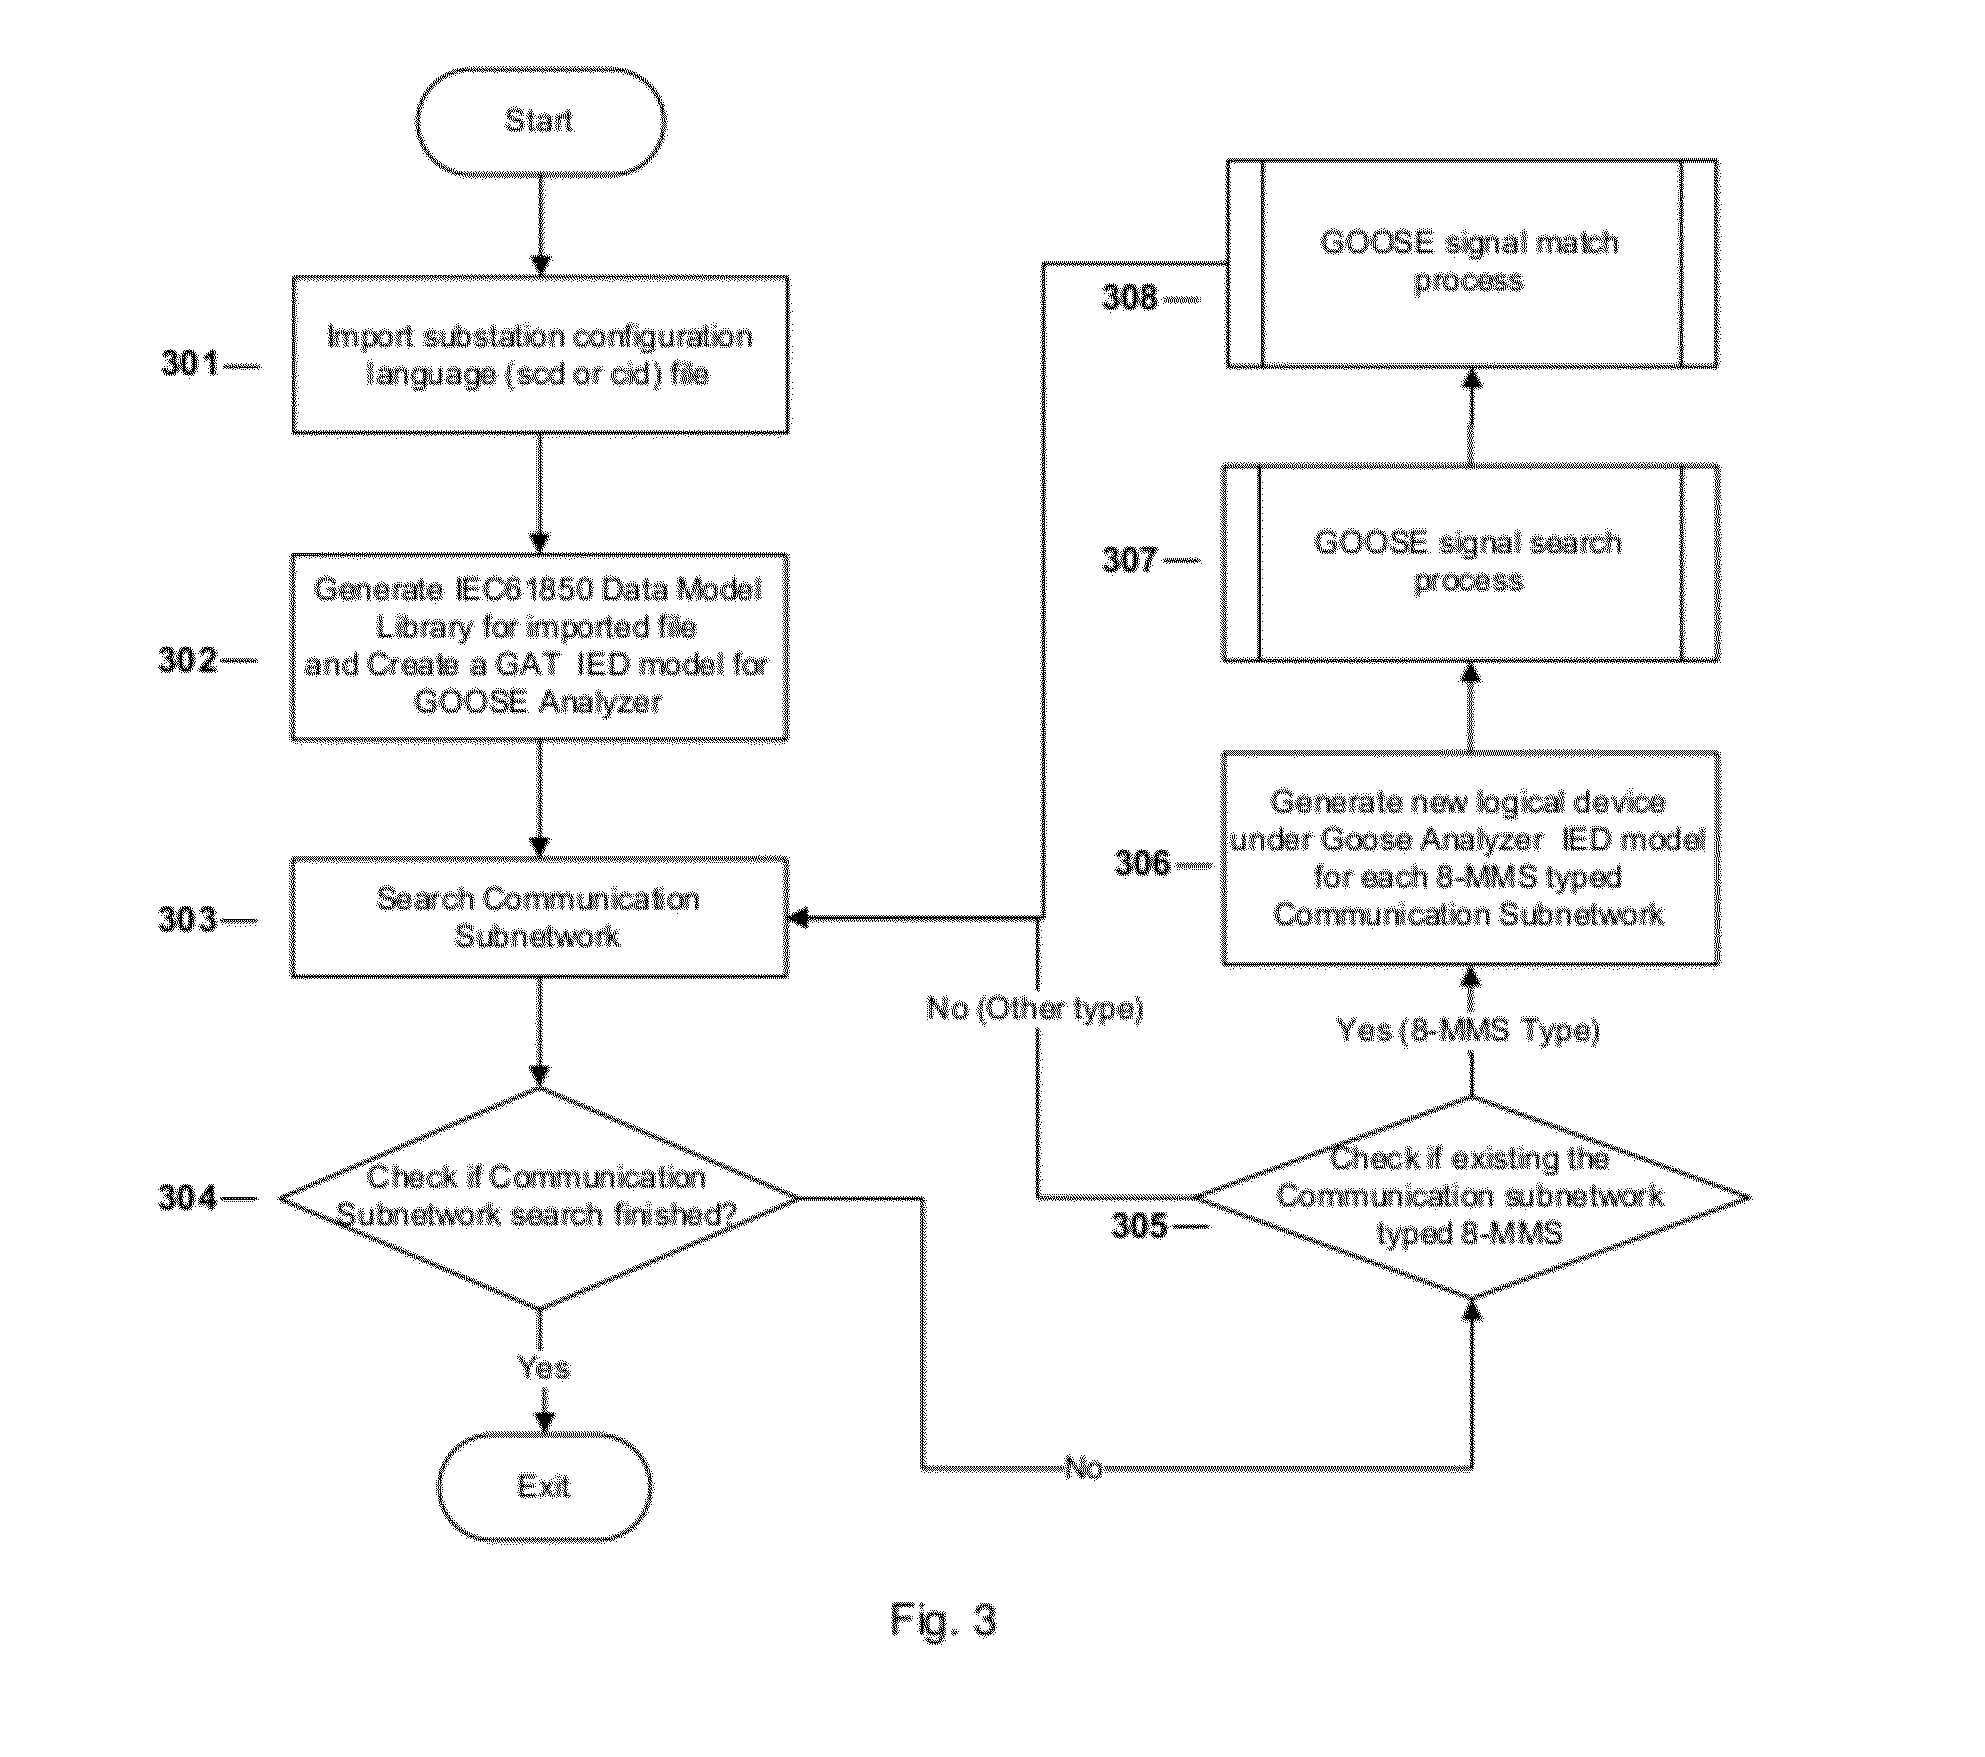 Method and Device for Auto-Generating Goose Signal Connection Topology from Substation Level